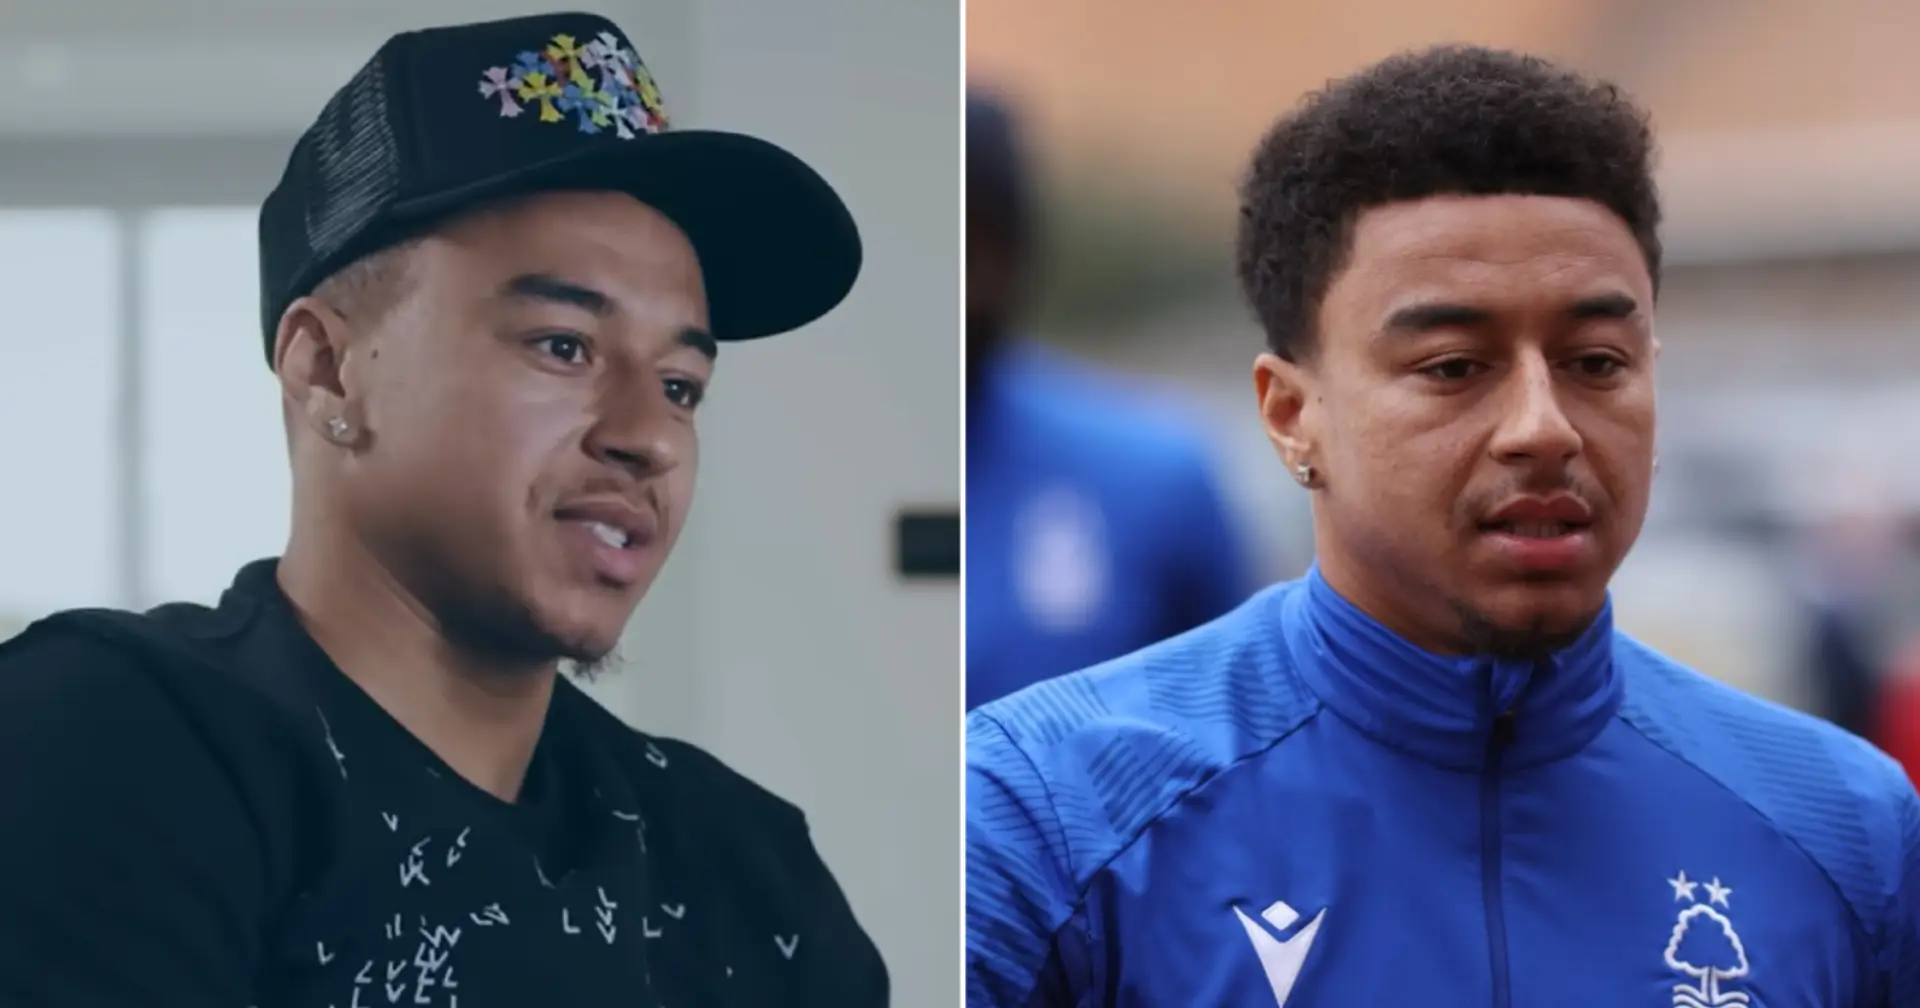 'It was false promises': Jesse Lingard hits out at Man United for freezing him out last season